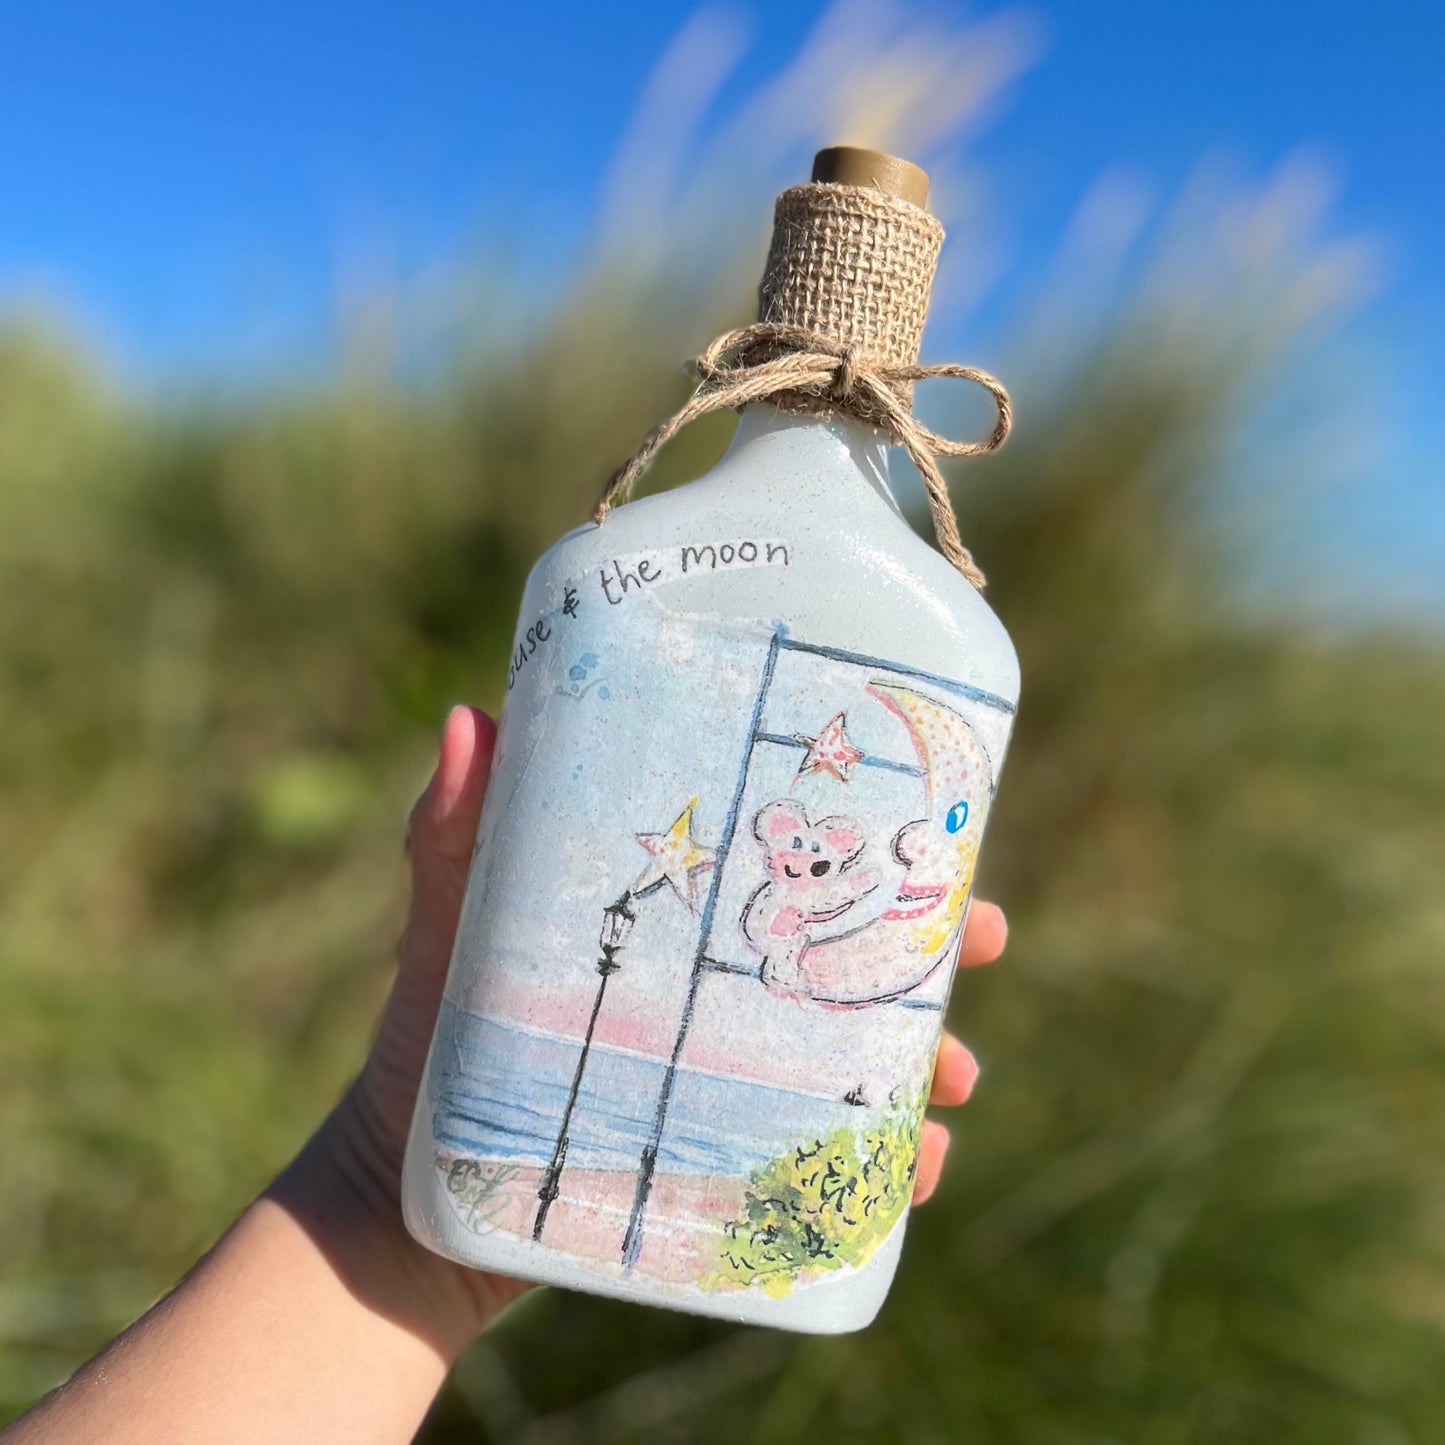 A decoupaged jar on Cleethorpes beach, featuring watercolour artwork of the Mouse and the Moon by Eve Leoni Smith and Jollypotz.